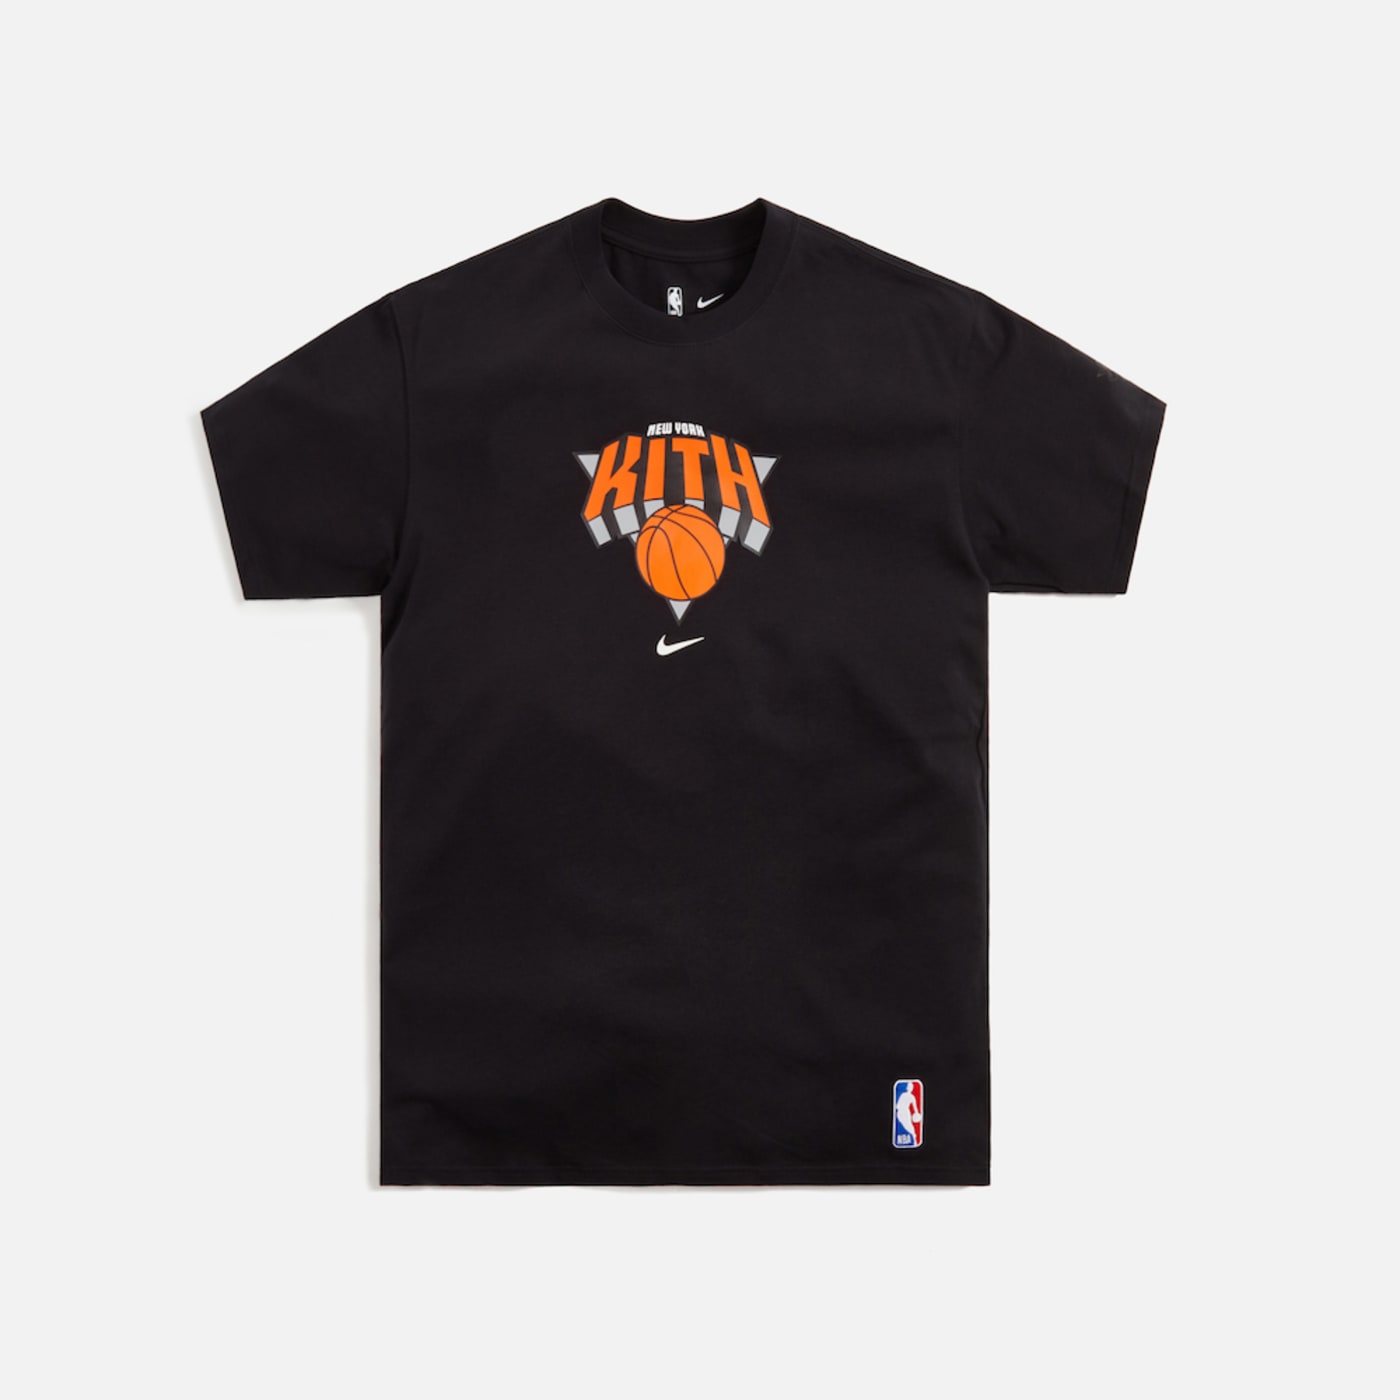 Here’s a Look at Kith and Nike’s New York Knicks Collection | Complex